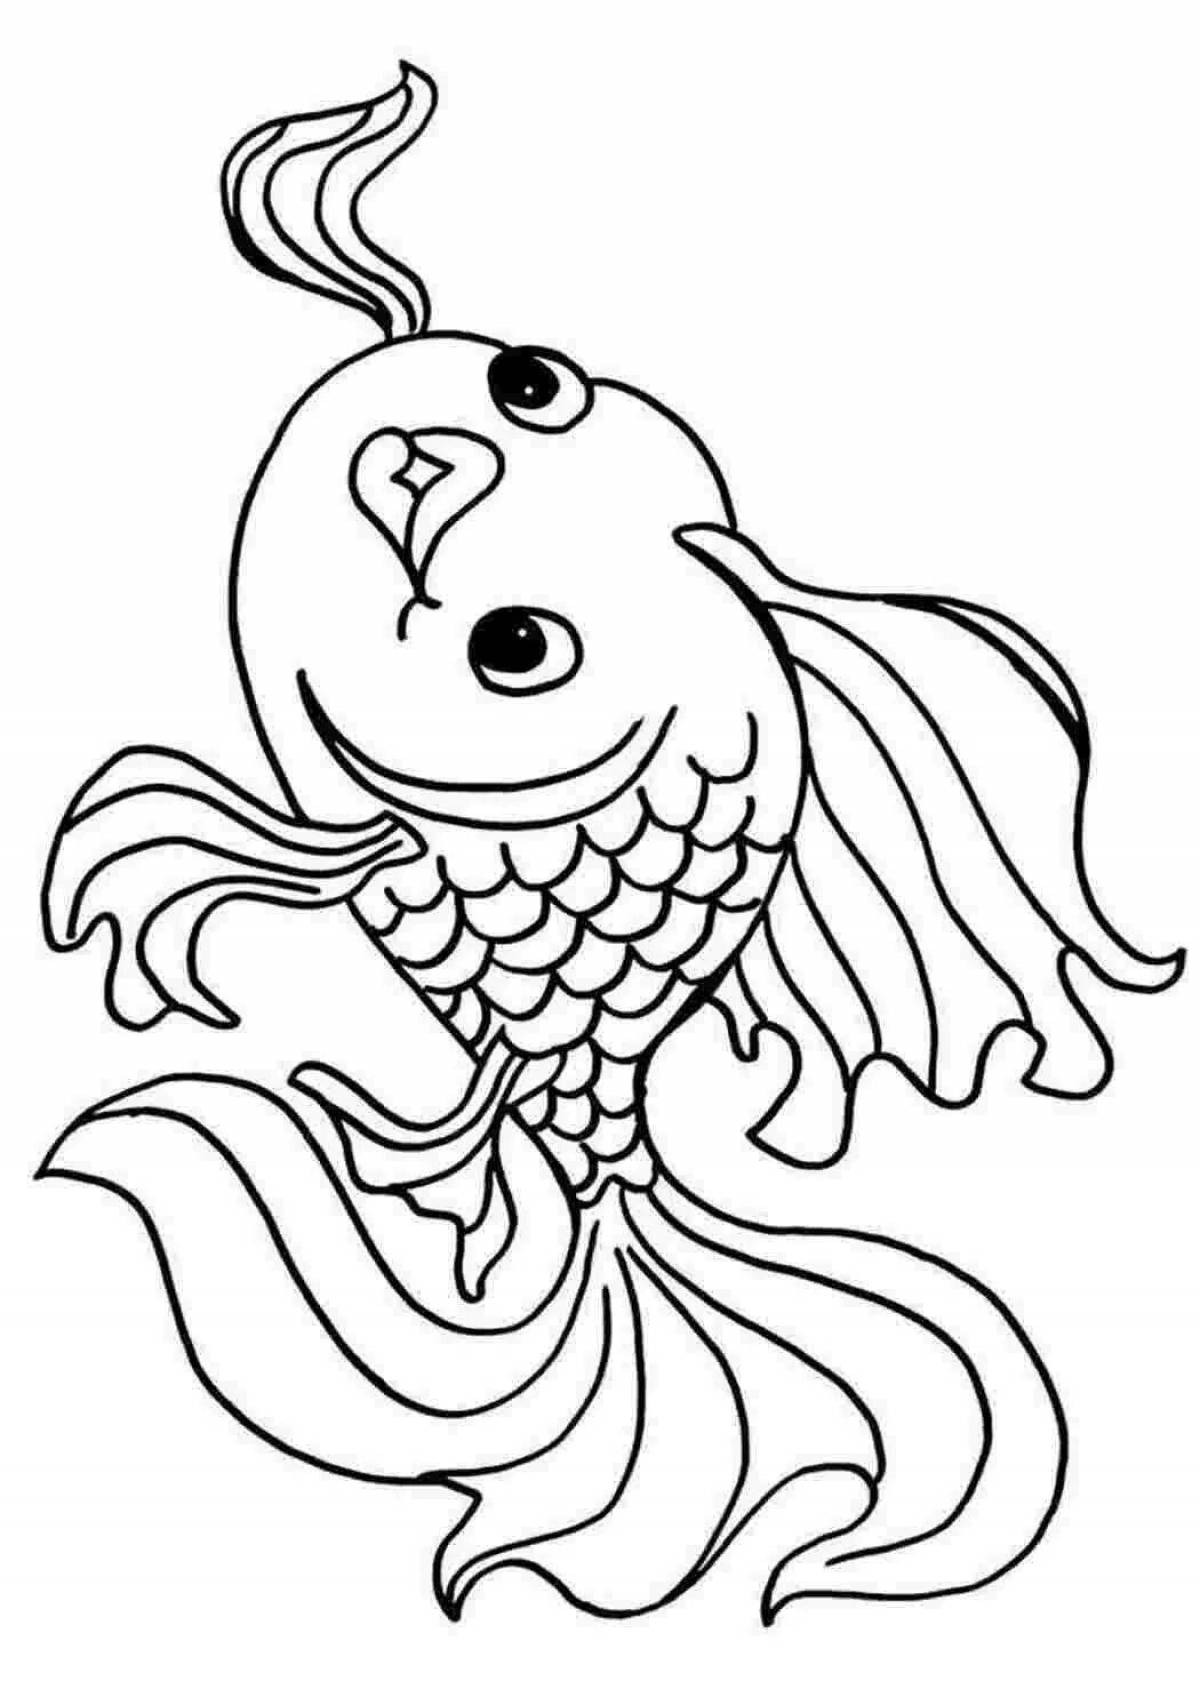 Incredible goldfish coloring book for 4-5 year olds